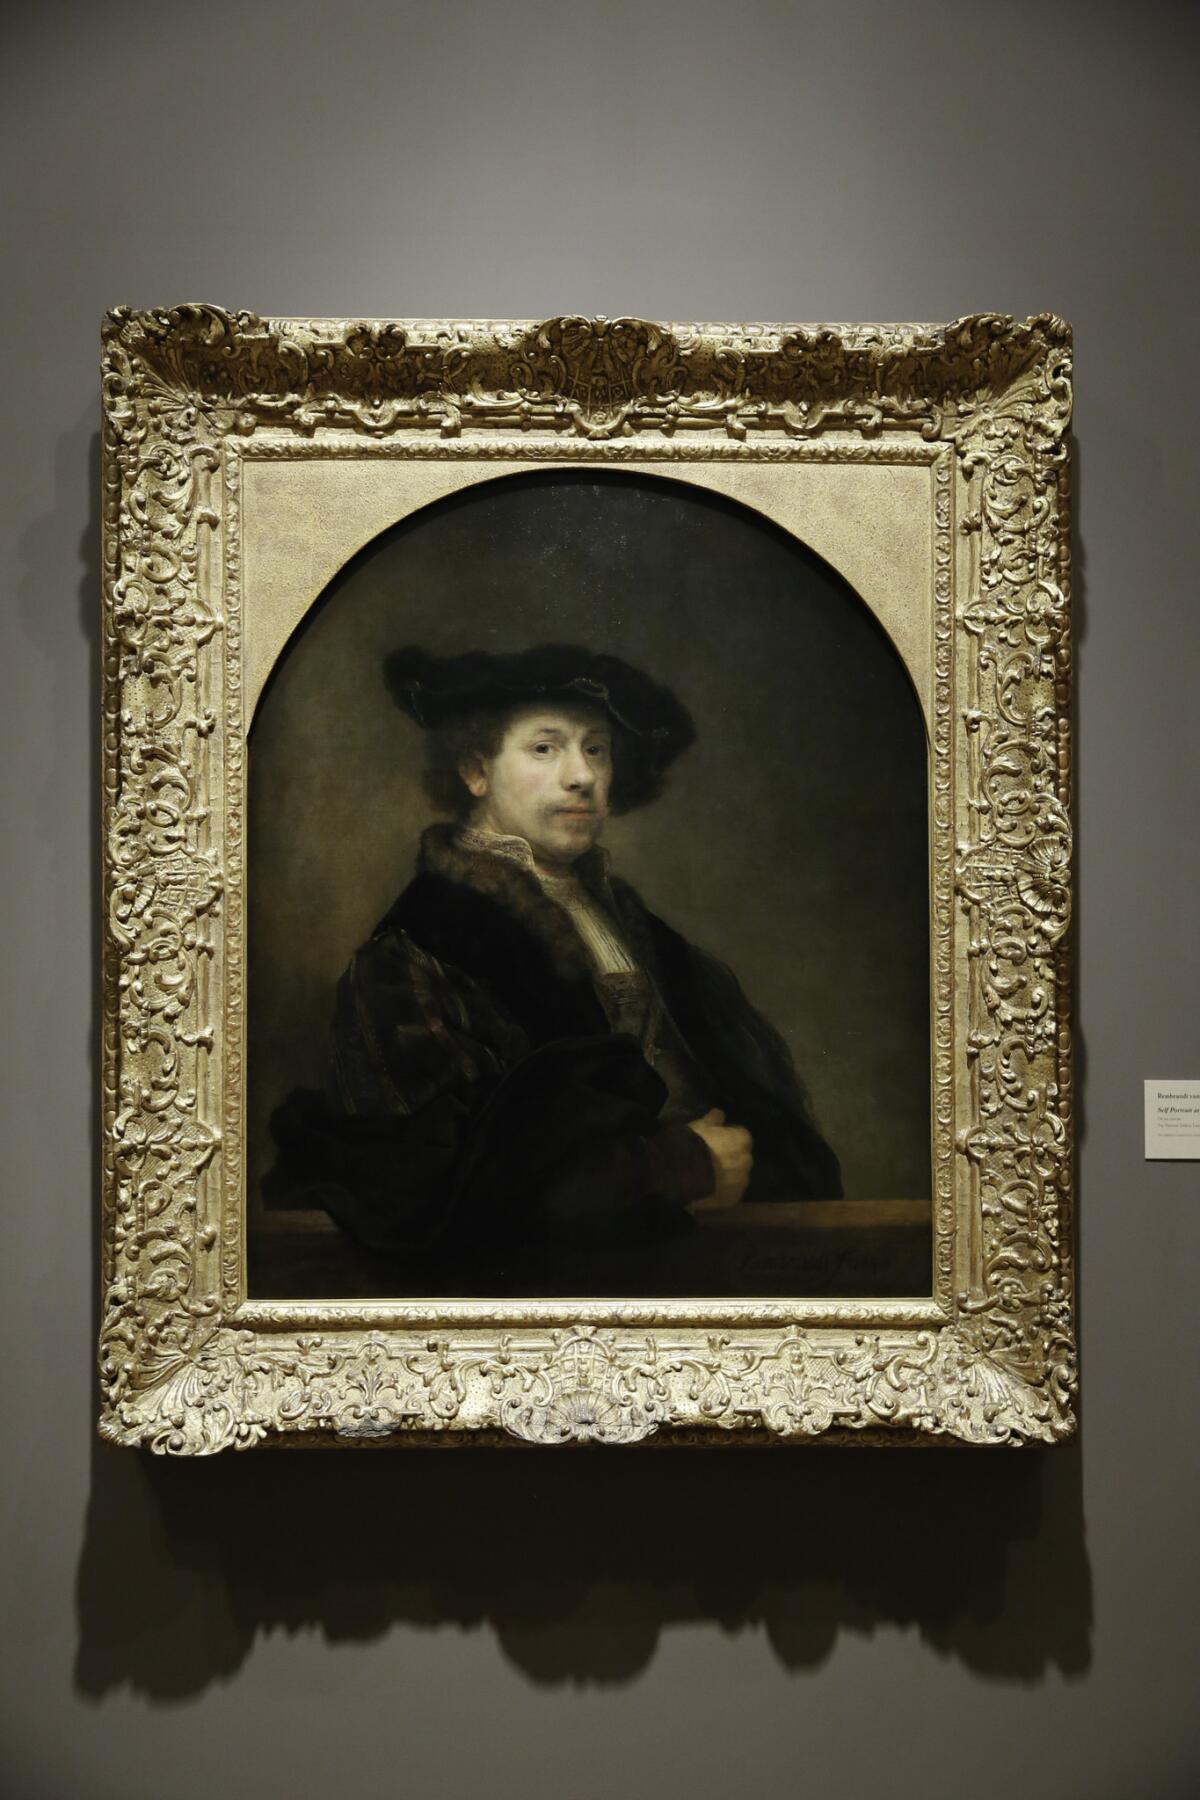 Rembrandt's "Self Portrait at the Age of 34," 1640. Oil on canvas, 102 centimeters by 80 centimeters.